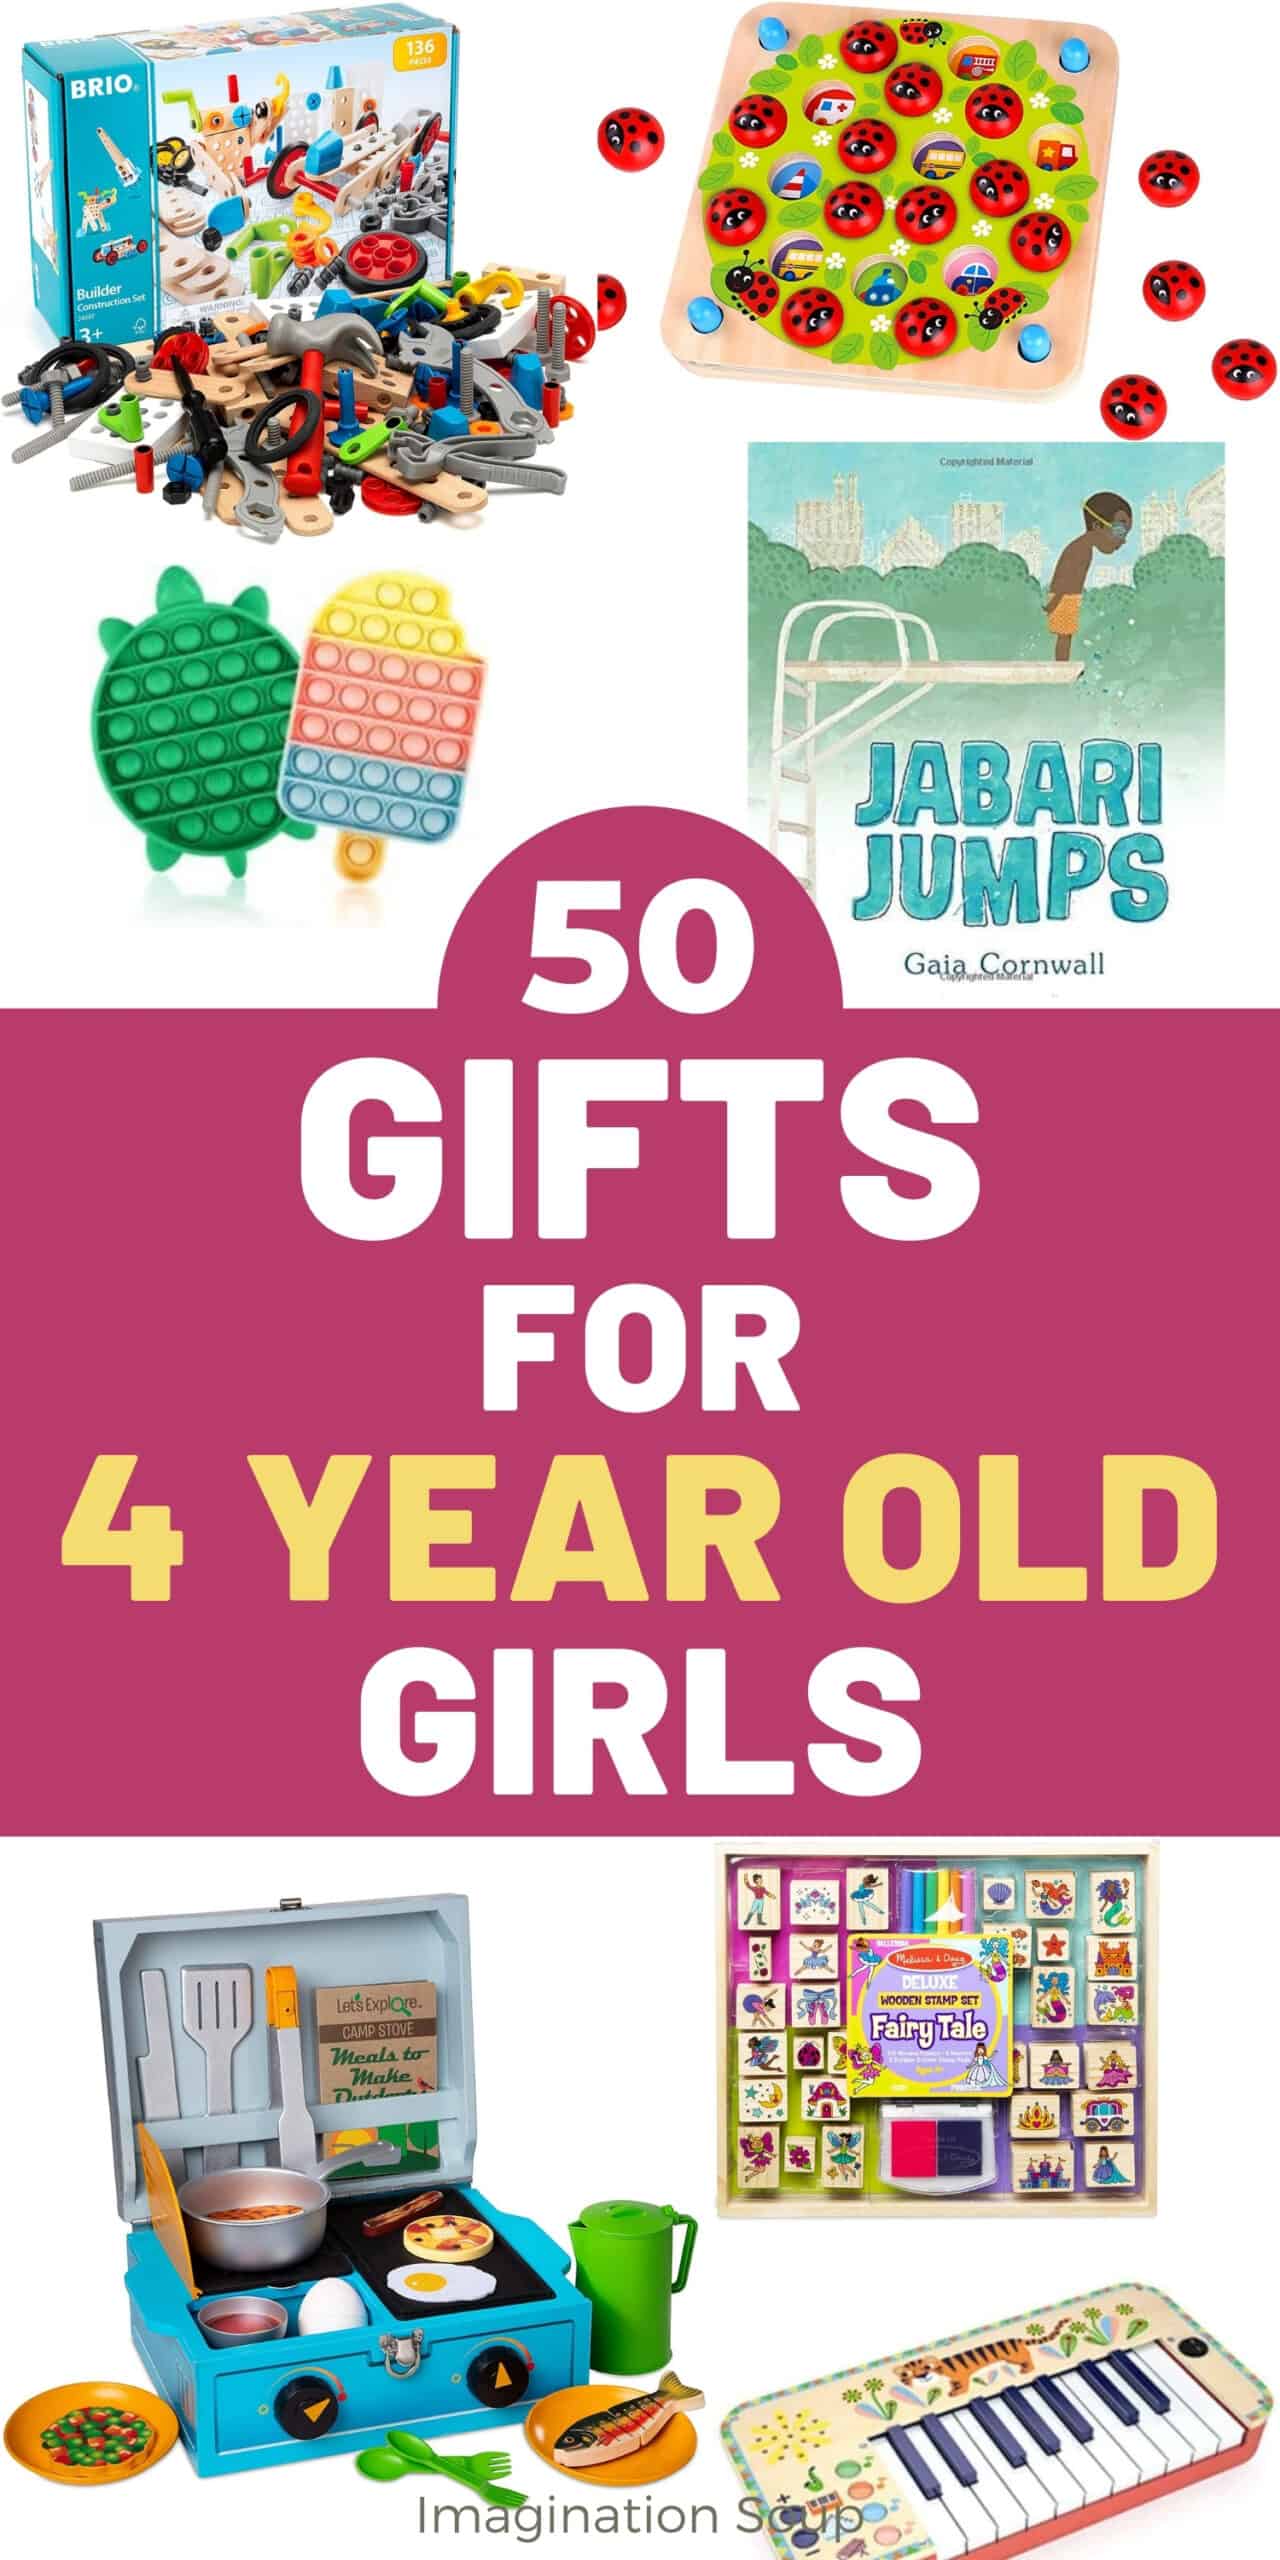 toys and gifts for 4 year old girls